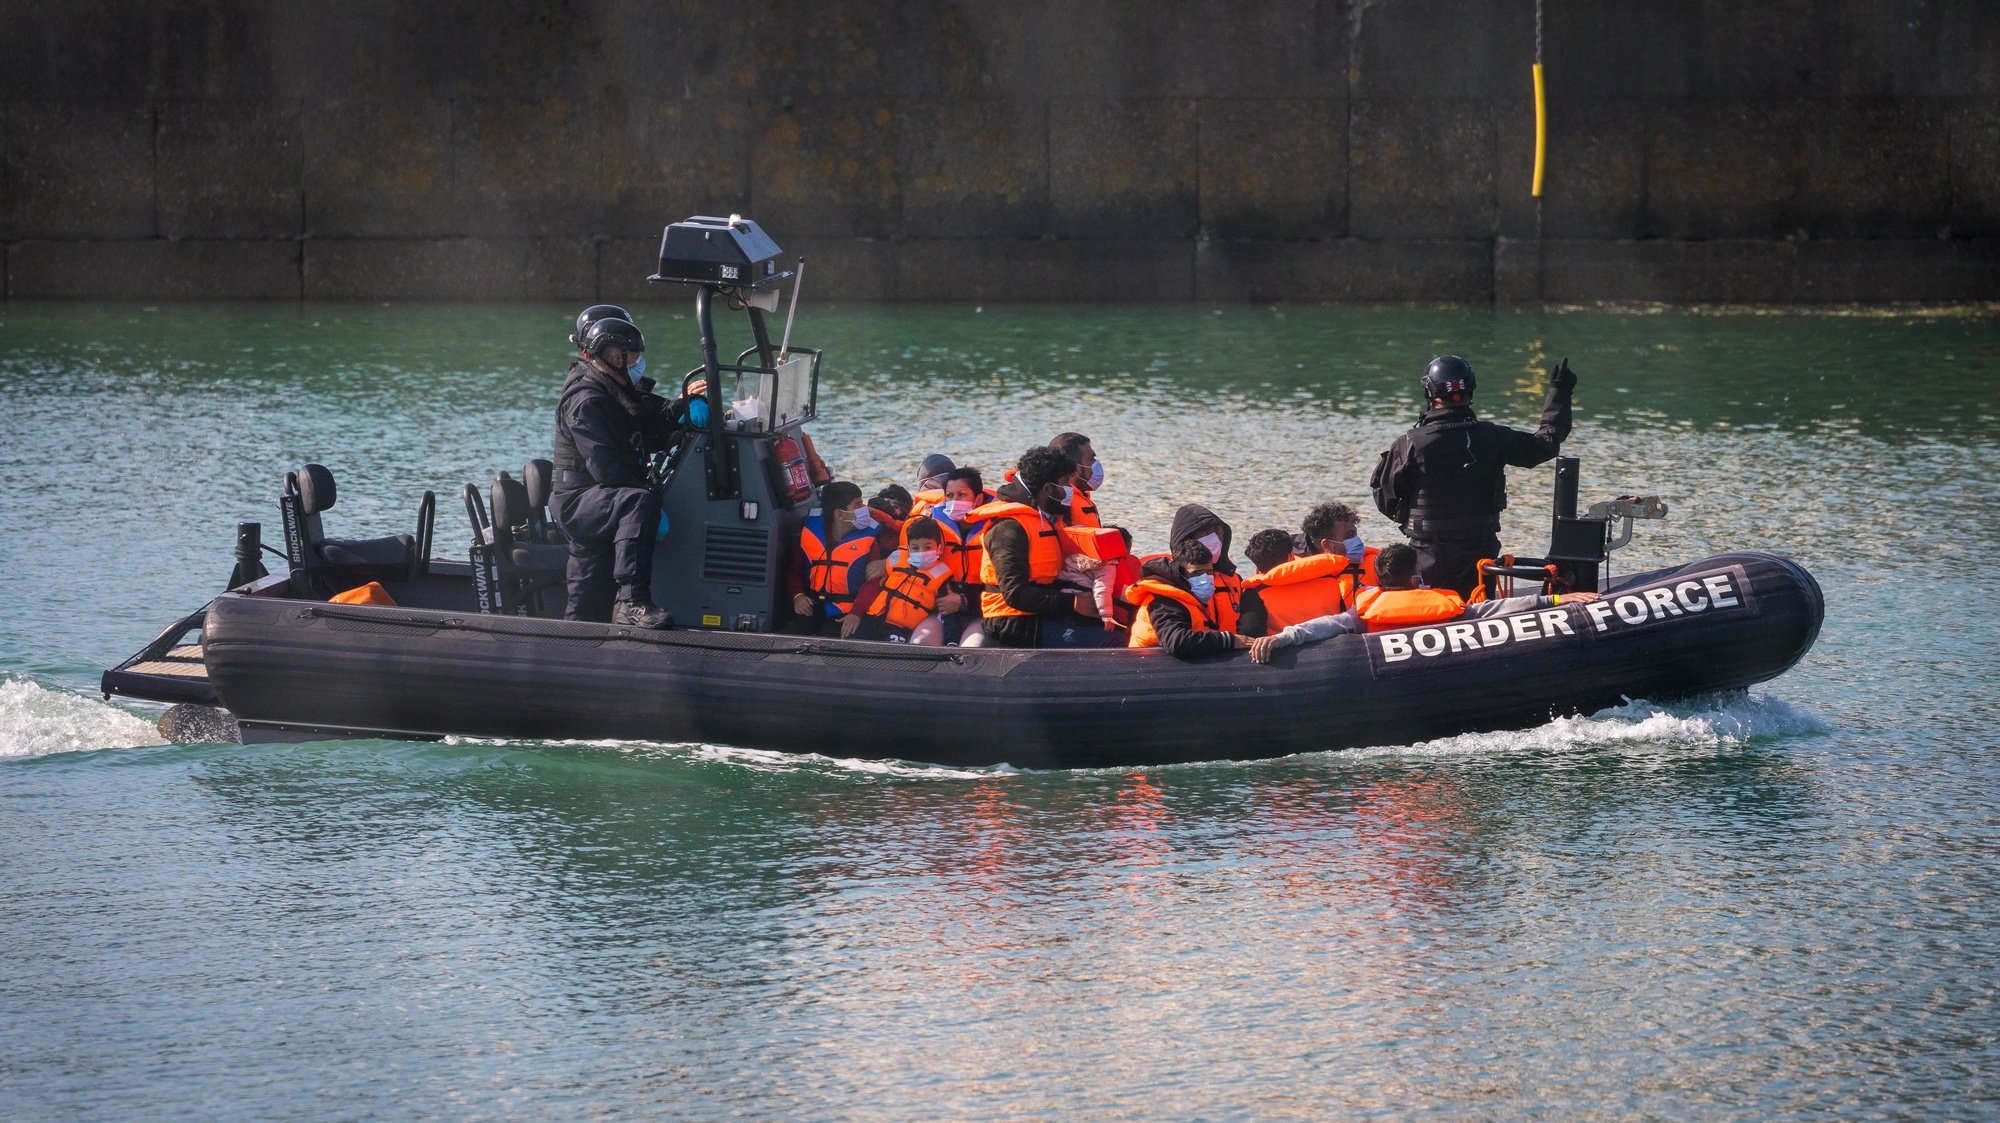 epa09358012 A boat from Britain&#039;s Border Force (BF) transports a group of people thought to be migrants, including children, who were found in the English Channel off the coast of Dover, in Dover, Kent, Britain, 22 July 2021. Britain and France are continuing ongoing talks in a bid to resolve the migrant crisis in the English Channel as migrants continue to arrive along the coast of the UK in their quest for asylum.  EPA/VICKIE FLORES